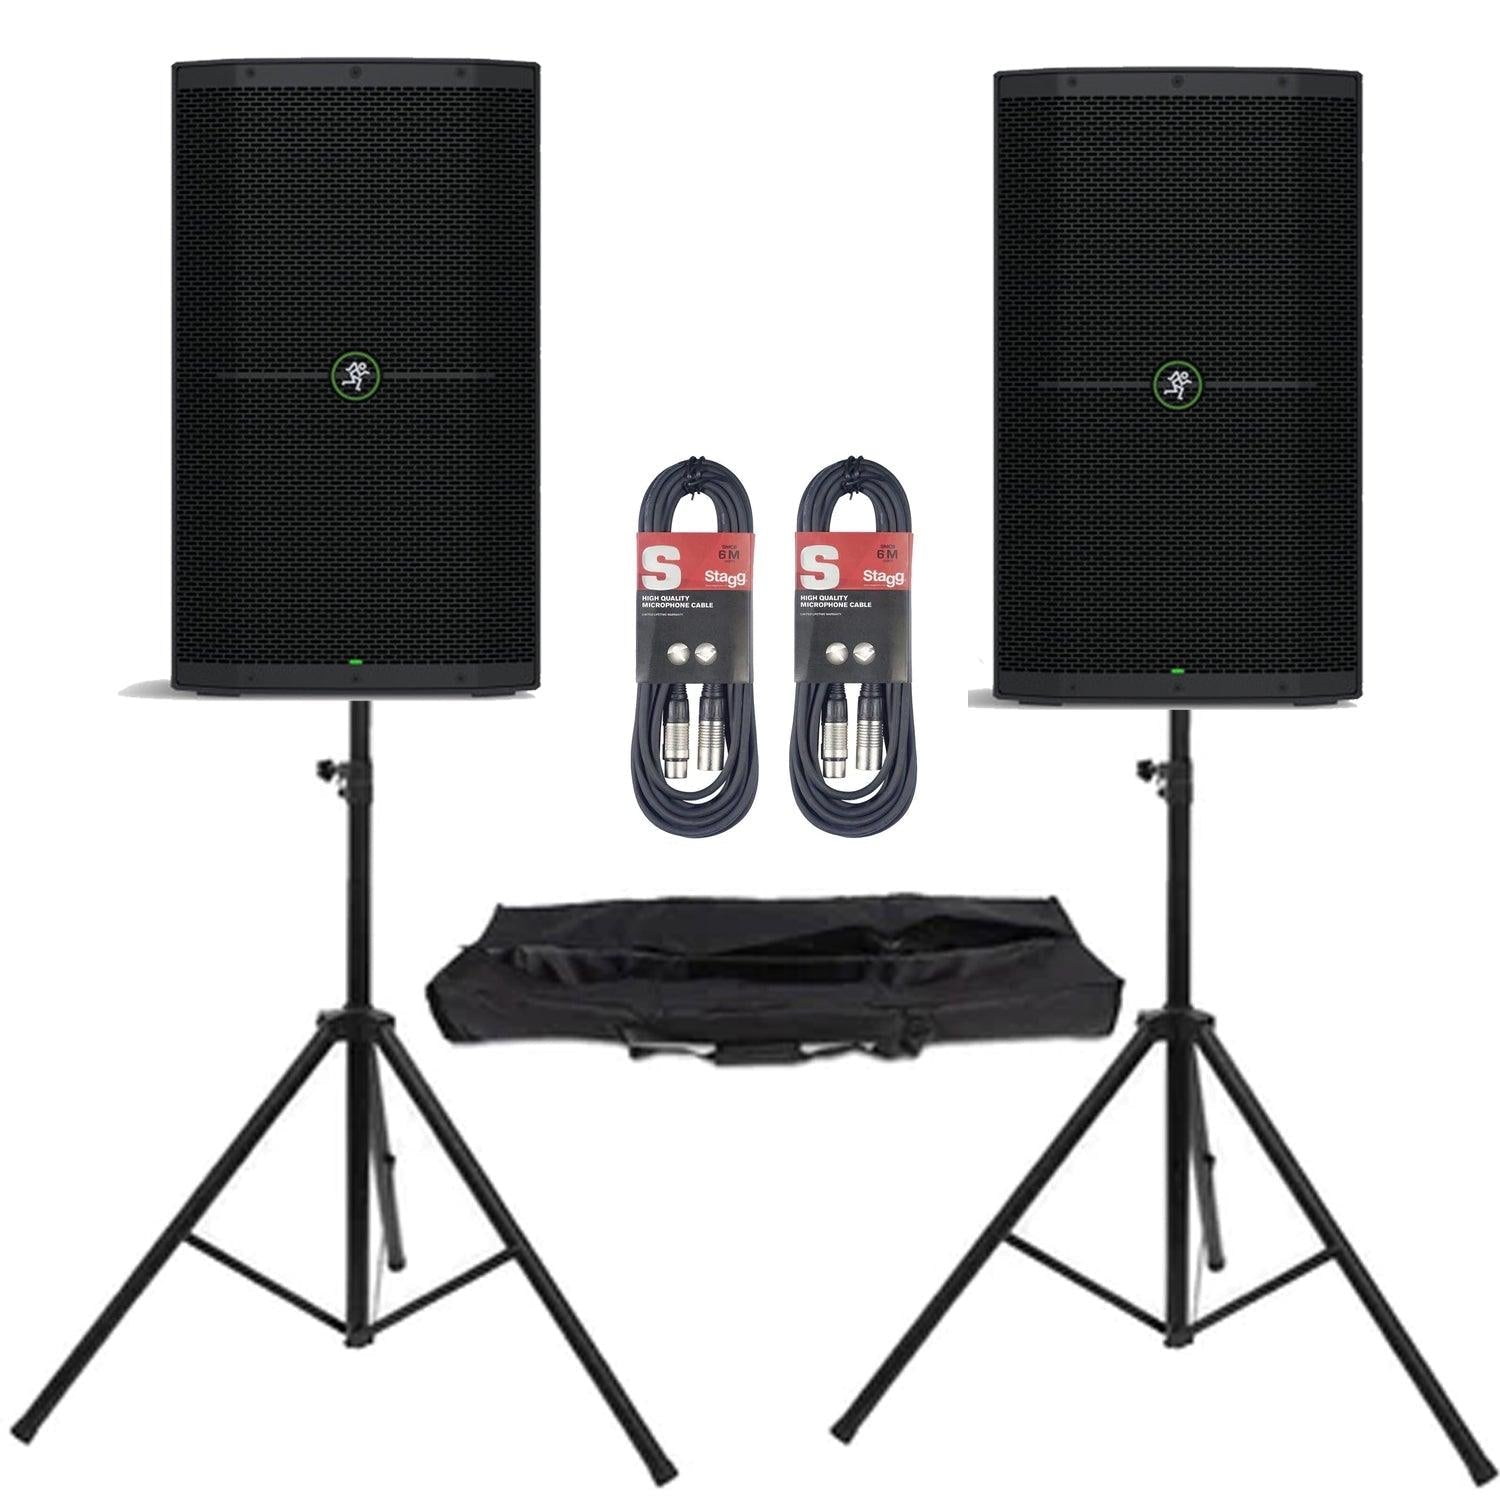 2 x Mackie Thump 215 Active Speaker With Stands & Cables Bundle - DY Pro Audio